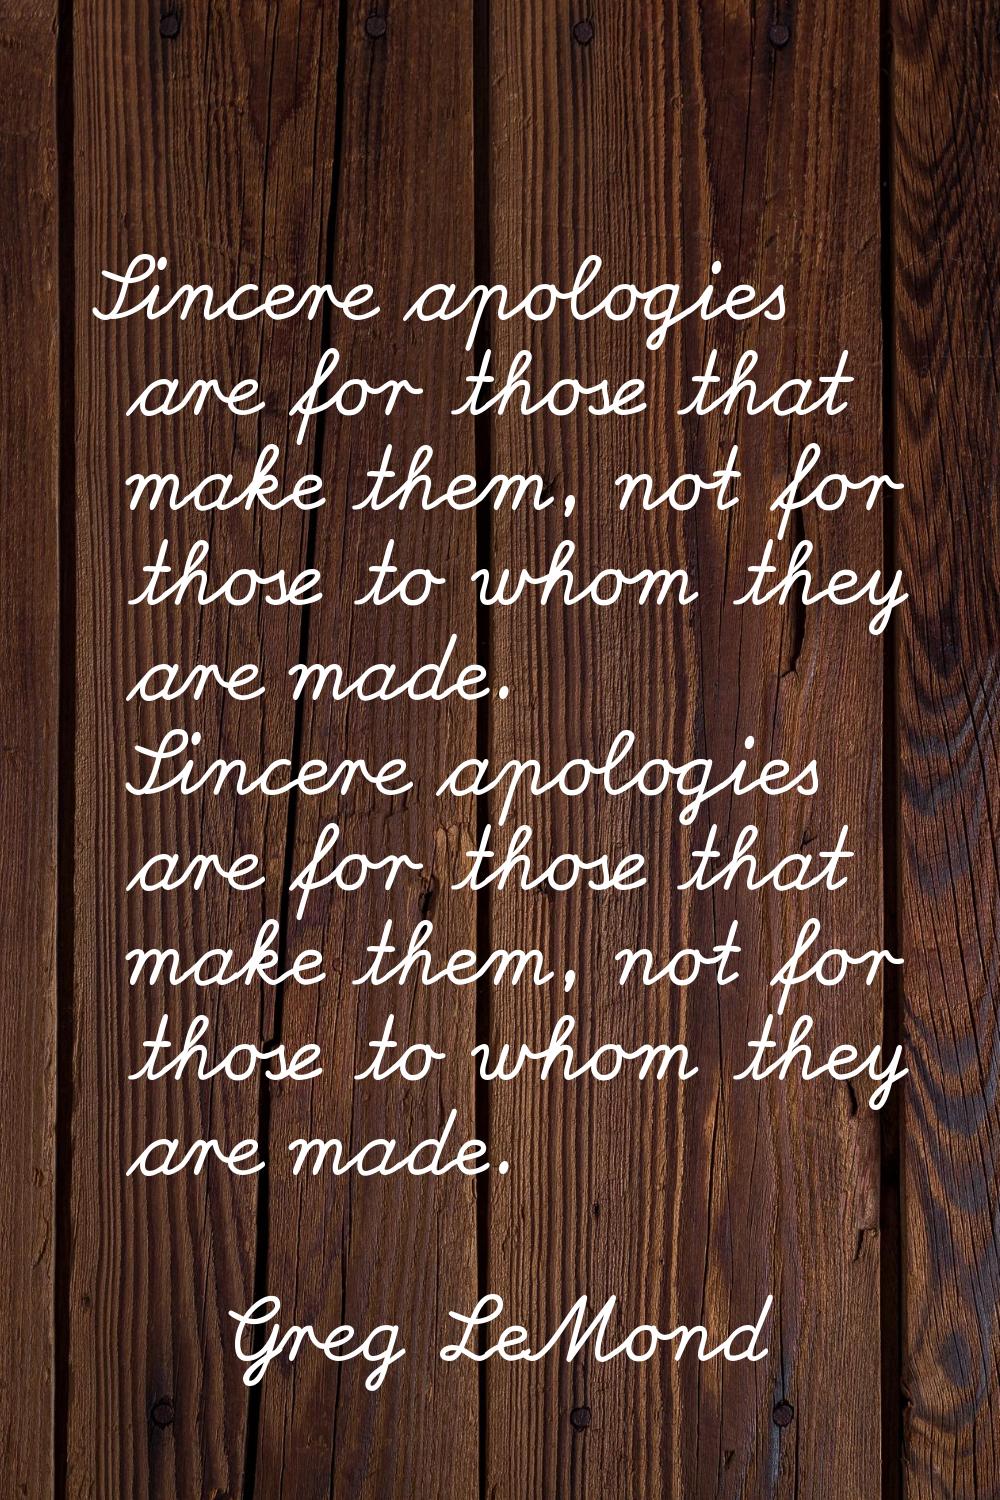 Sincere apologies are for those that make them, not for those to whom they are made. Sincere apolog